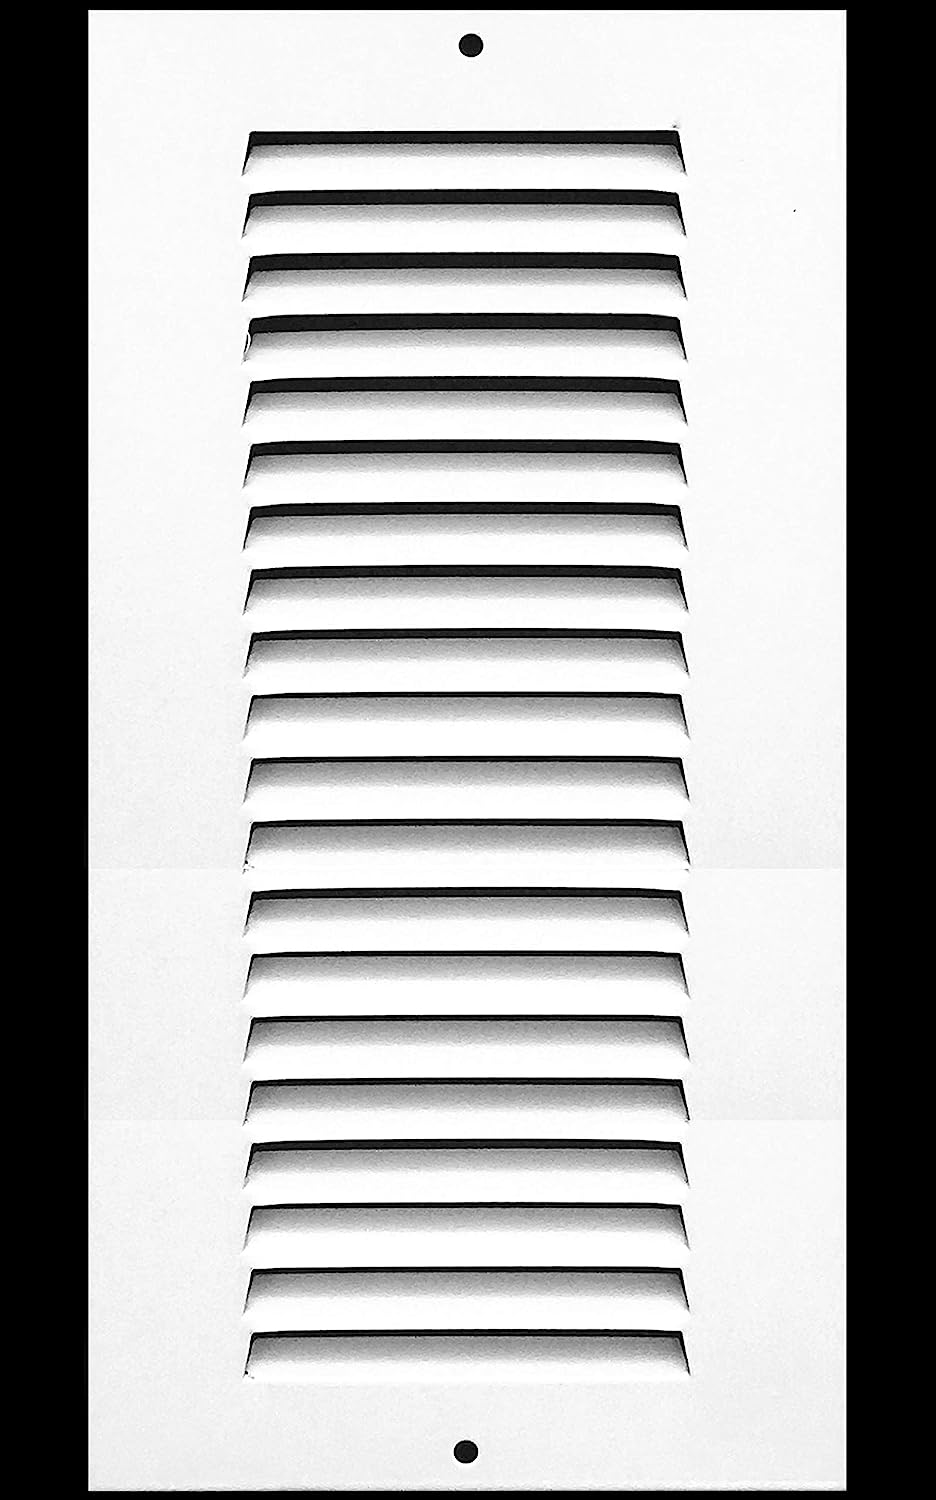 4&quot; X 14&quot; Air Vent Return Grilles - Sidewall and Ceiling - HVAC VENT DUCT COVER DIFFUSER - Steel